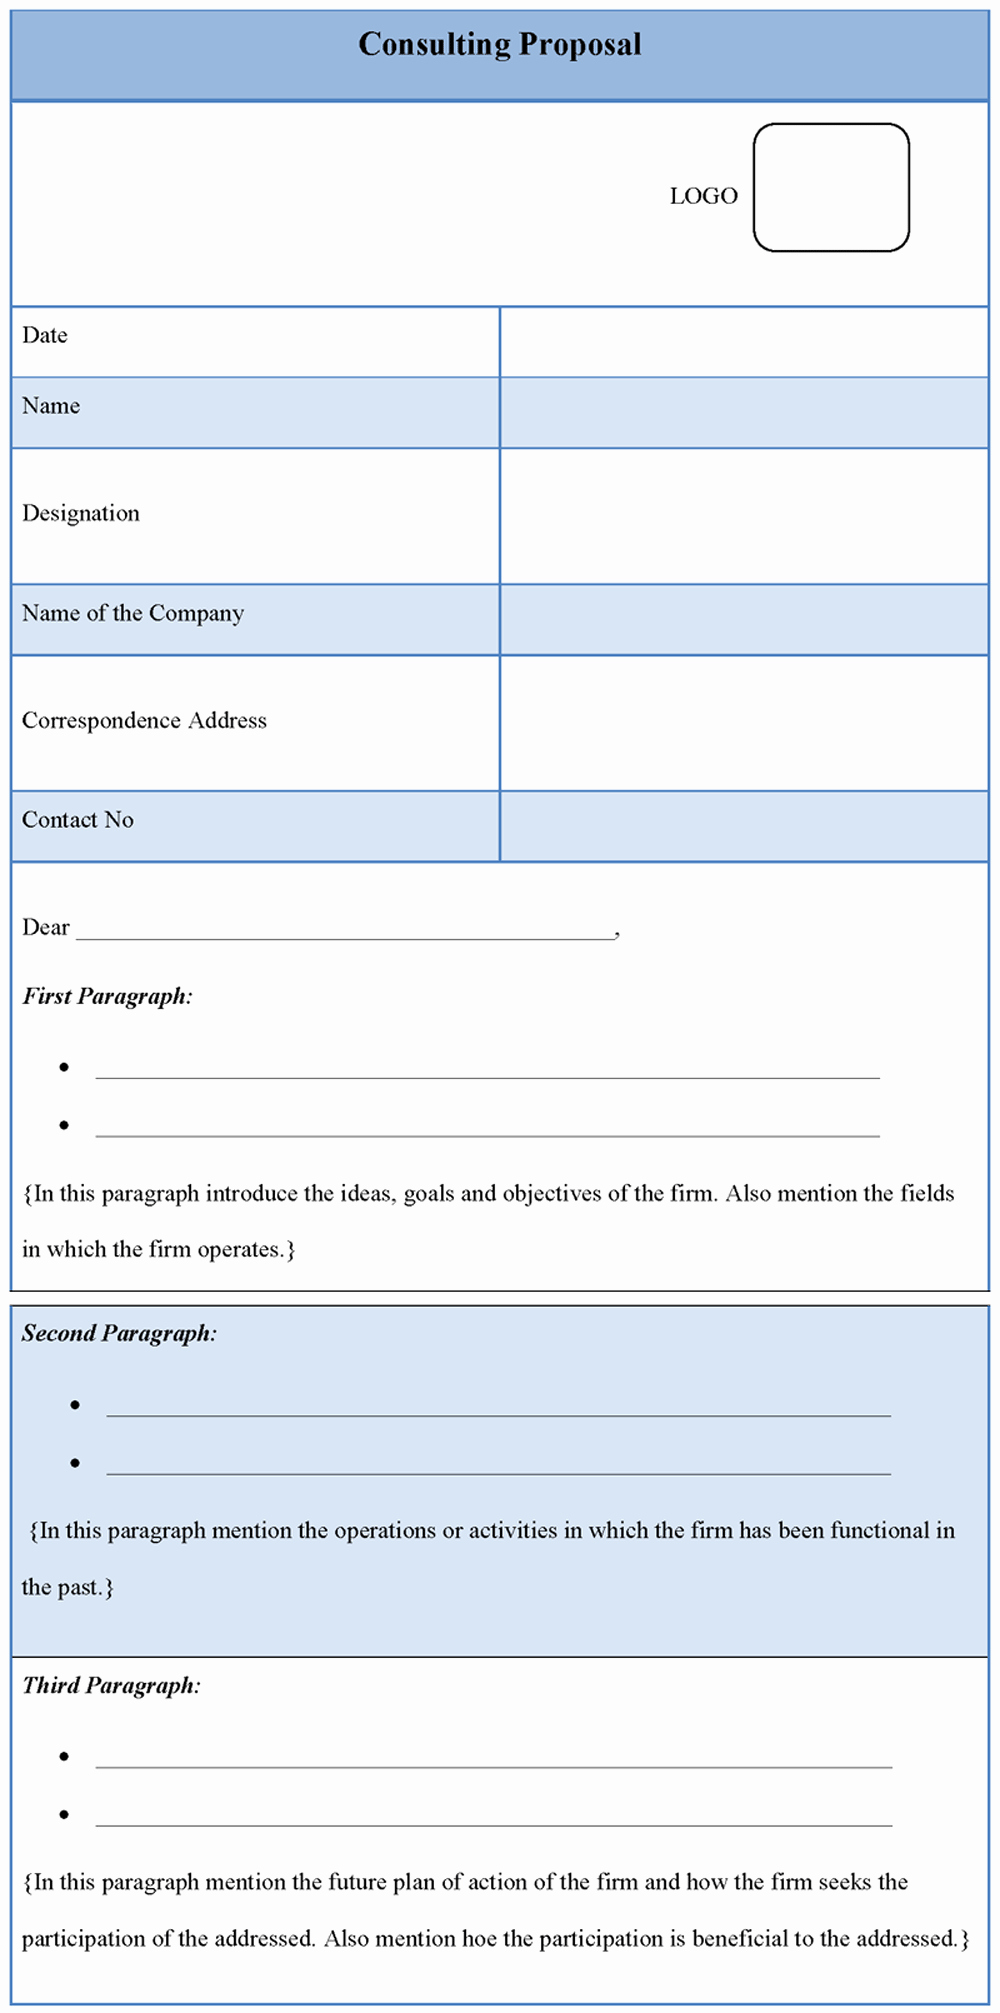 Consulting Proposal Template Word Fresh Consulting Proposal Template